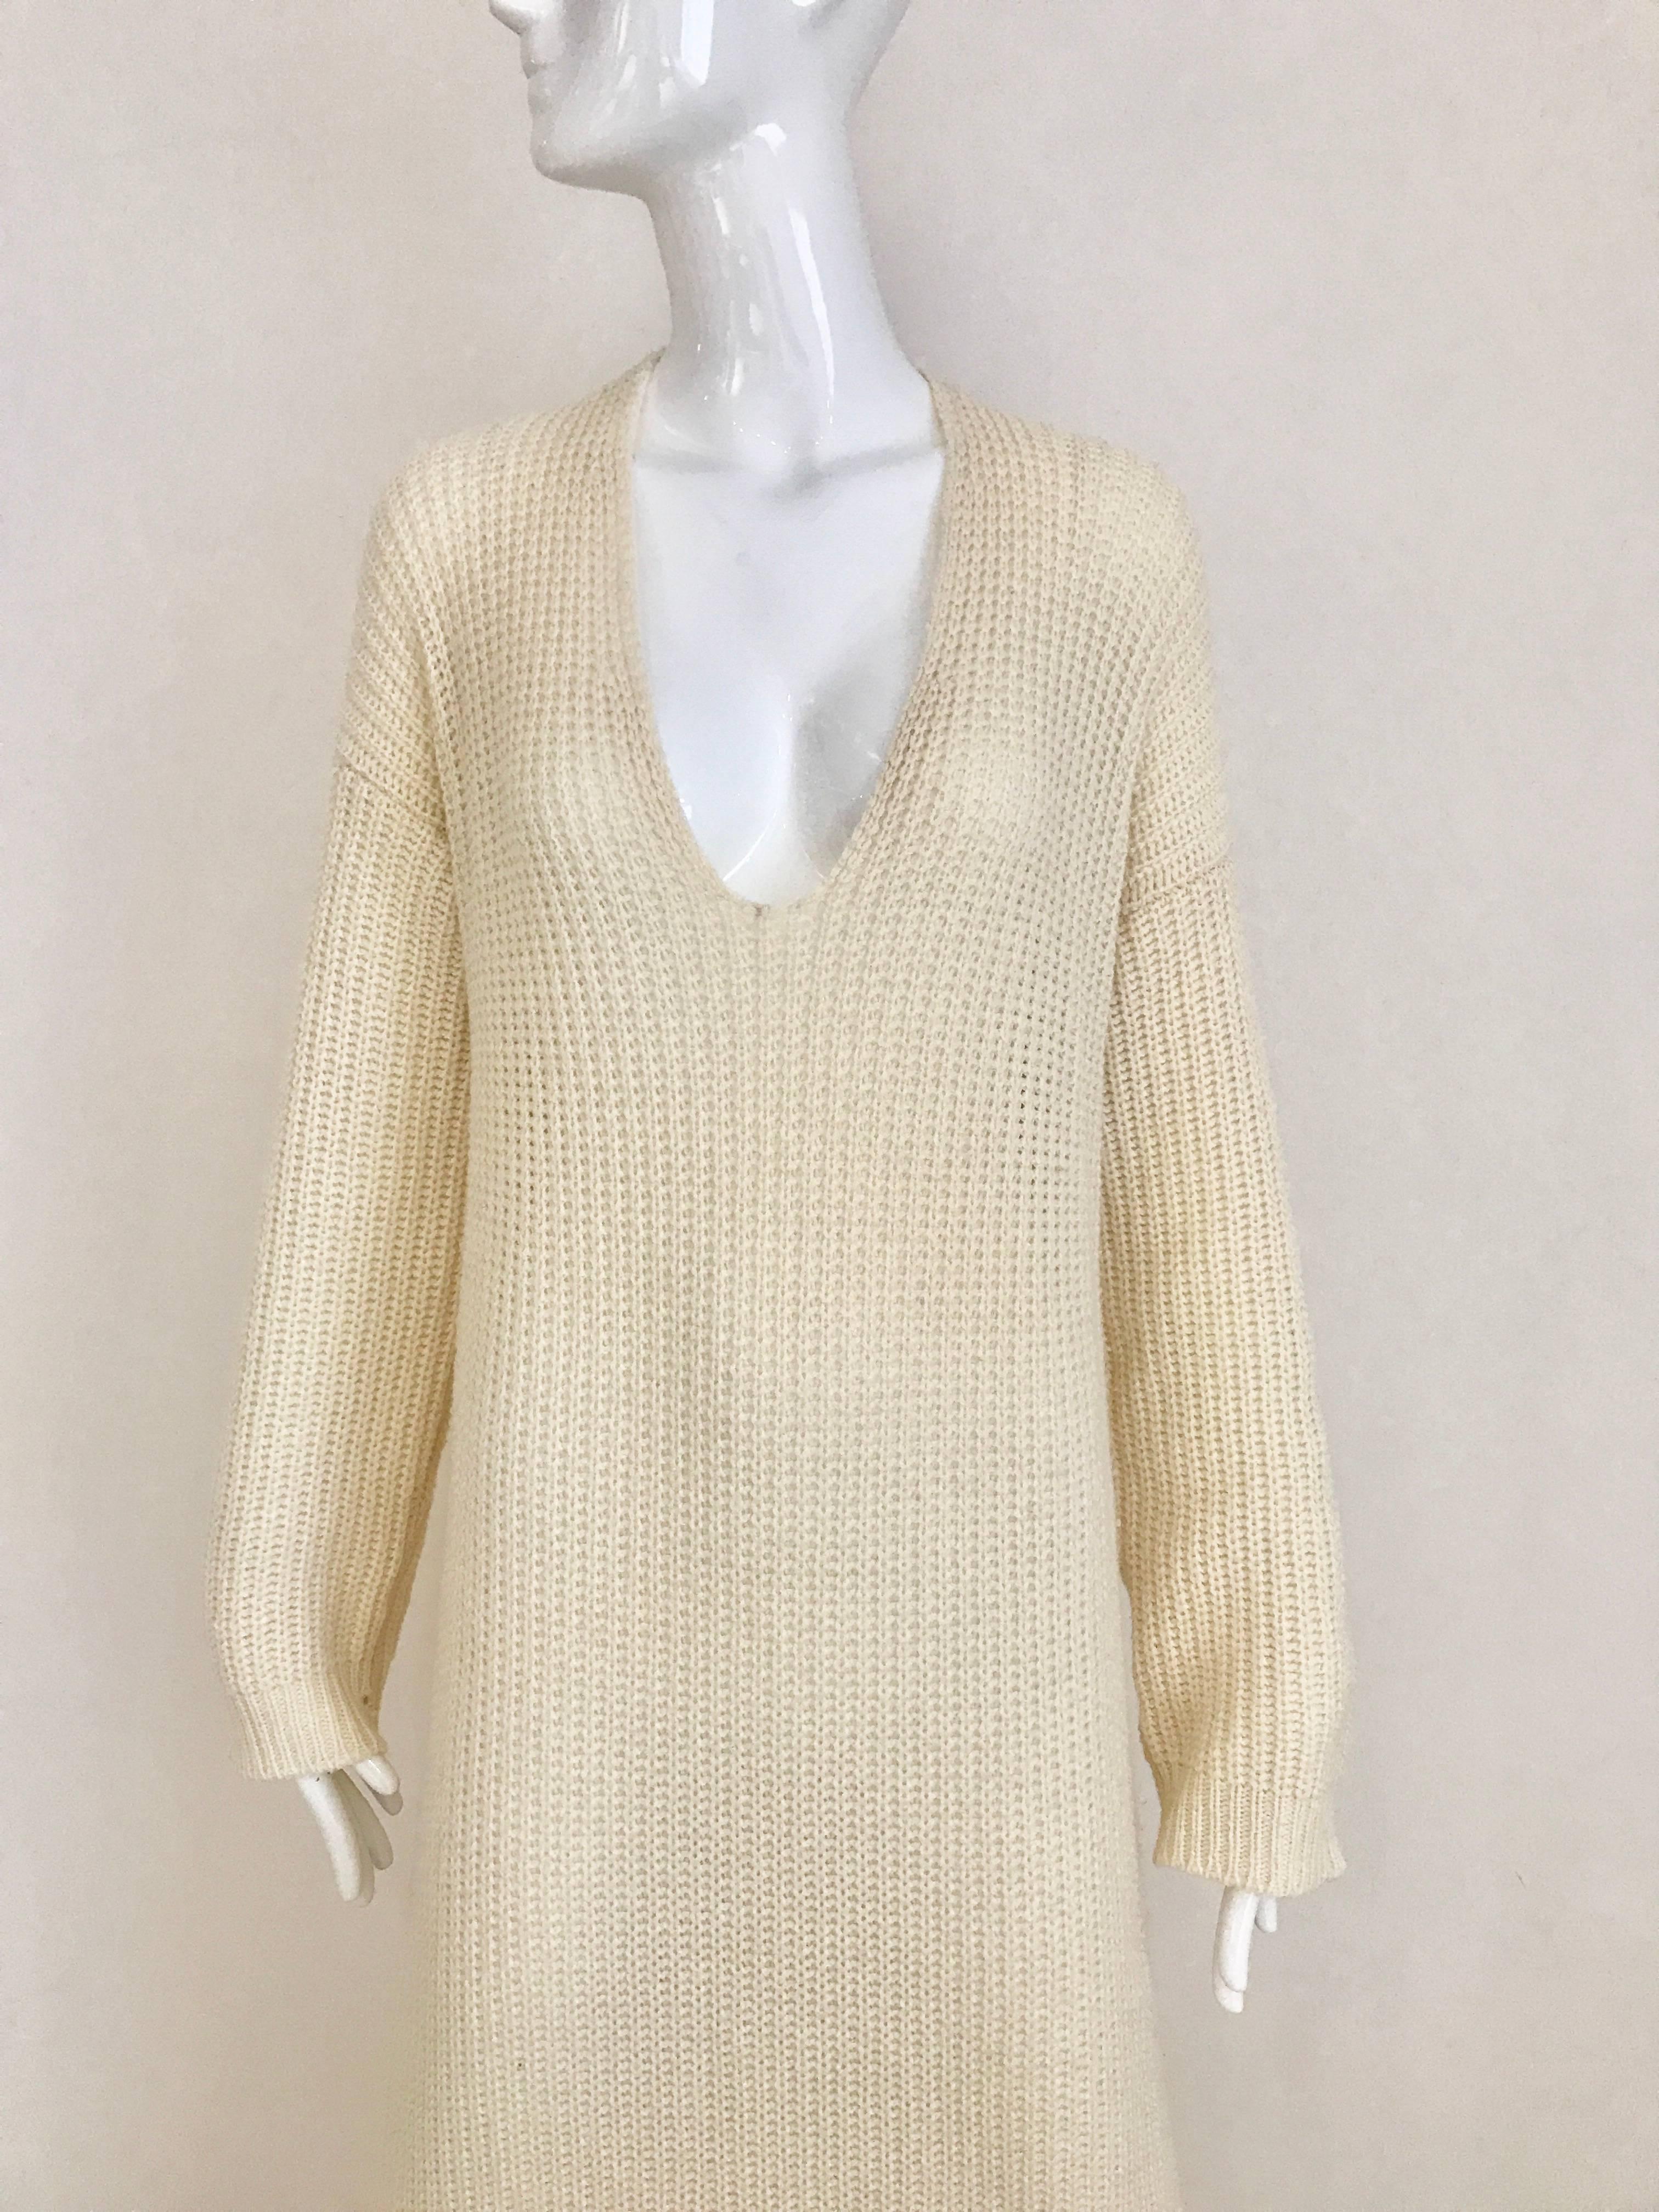 Cozy and Chic vintage Jil Sander Creme Ribbed Cashmere Long sleeve sweater dress. 
Size: Medium and Large.  Fit size 6/8/10
Bust: 40 inch/ Waist: 40 inch / hip 40 inch / Dress Length: 62 inch
V neck depth: 10 inch / sleeve length:  20 inch

****